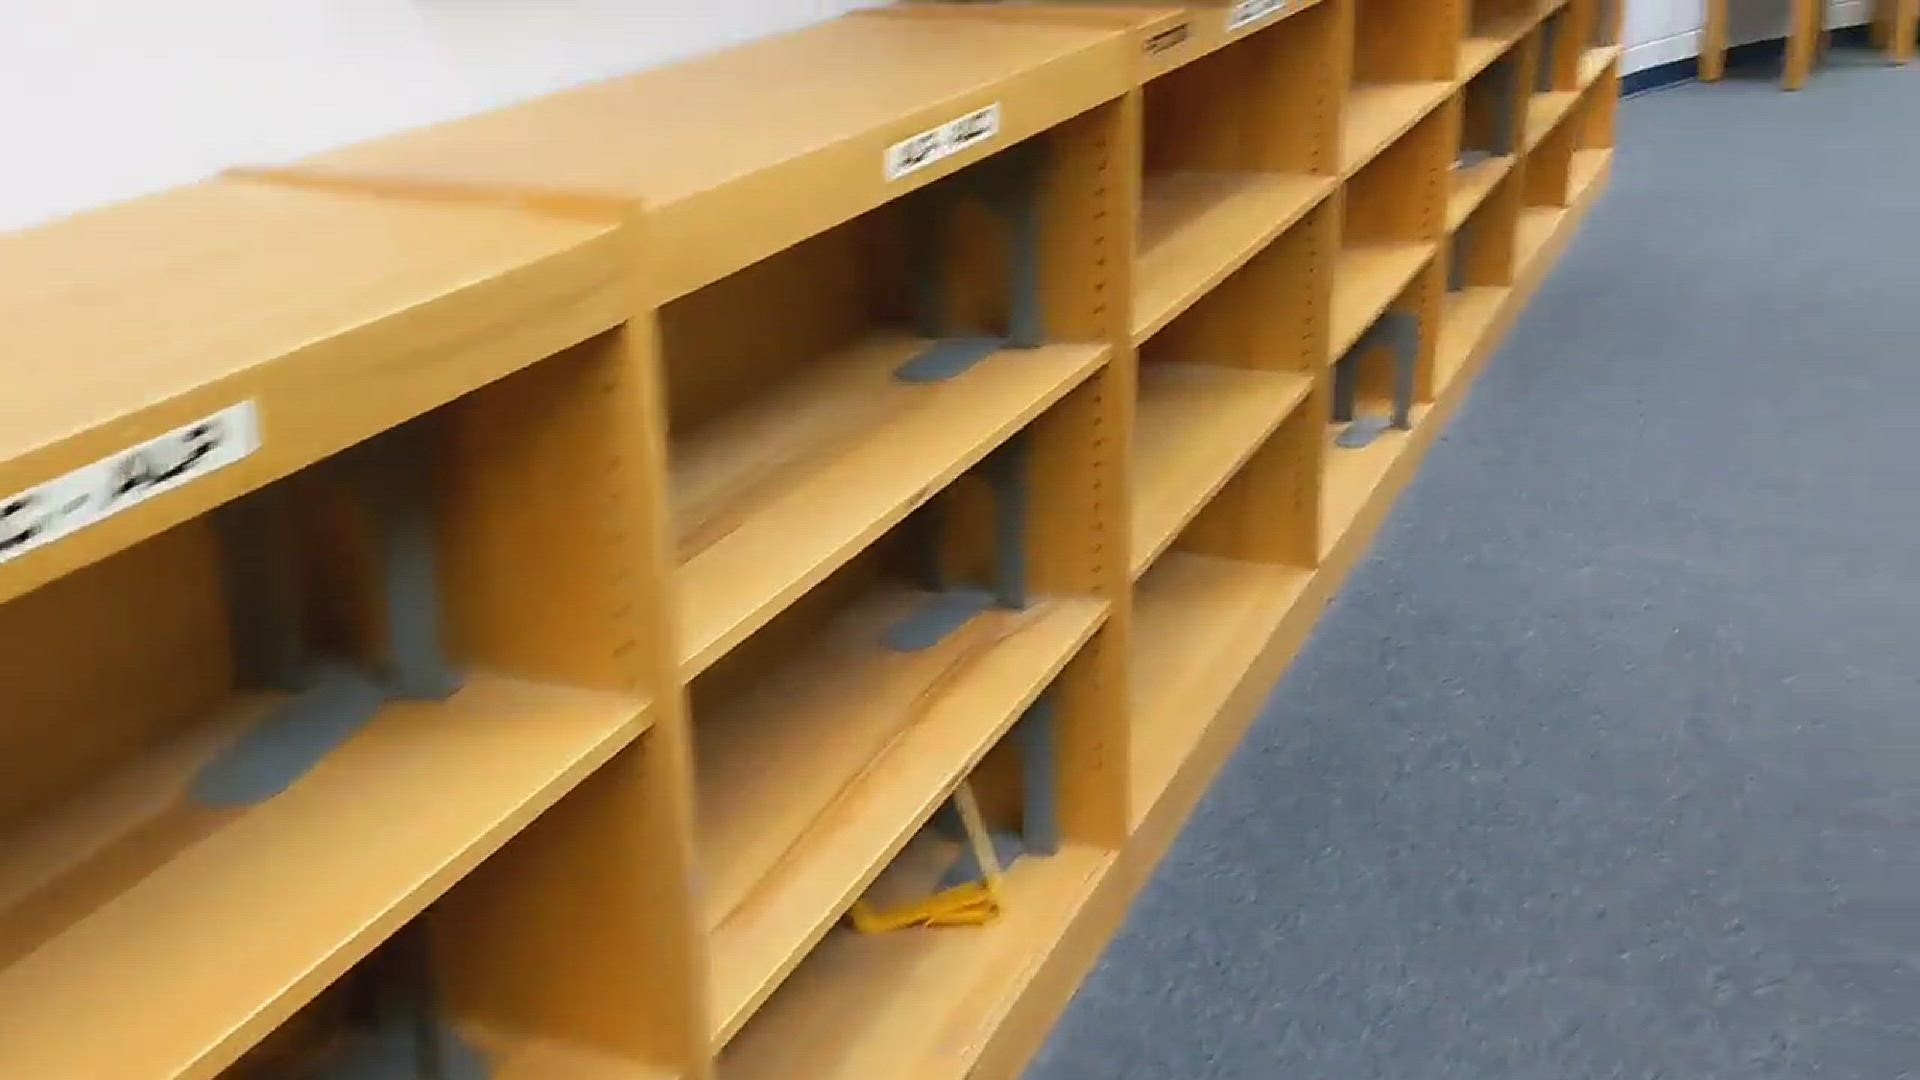 Brian Covey said bookshelves were emptied at his children's school last week. DCPS is reviewing books to ensure they fall in line with new state law passed in July.